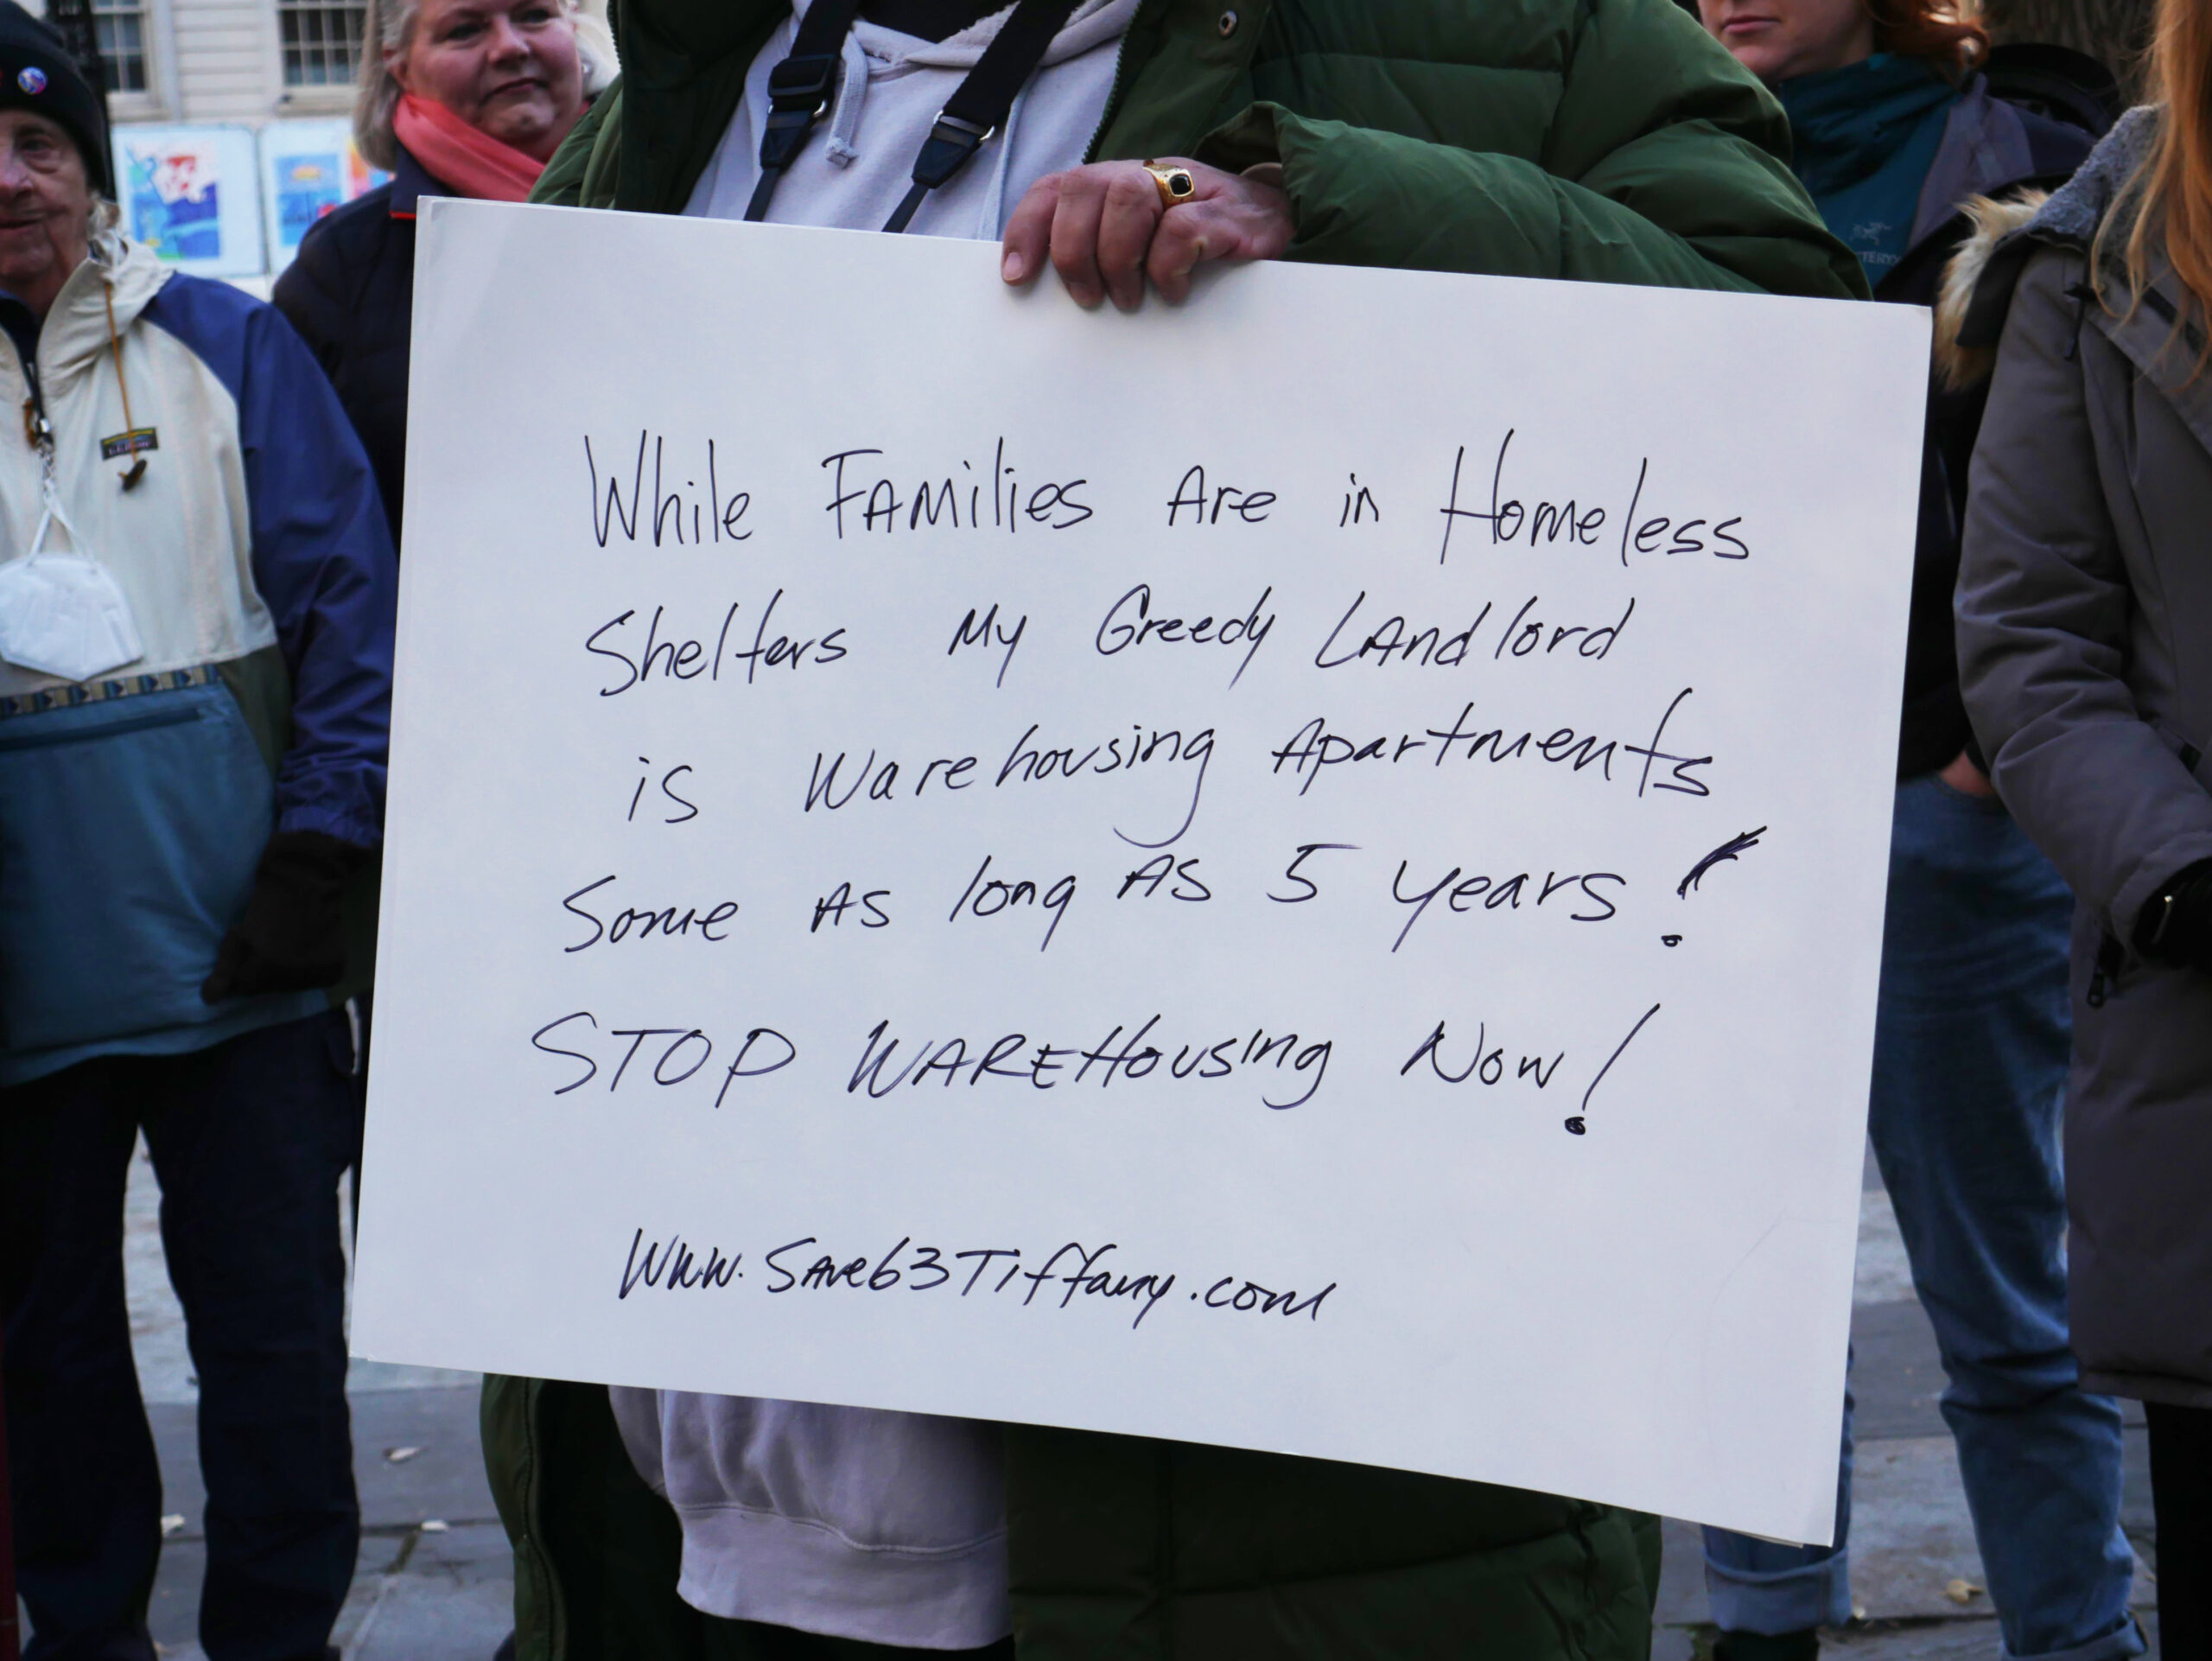 John Levya, housing activist, holding a sign at the rally